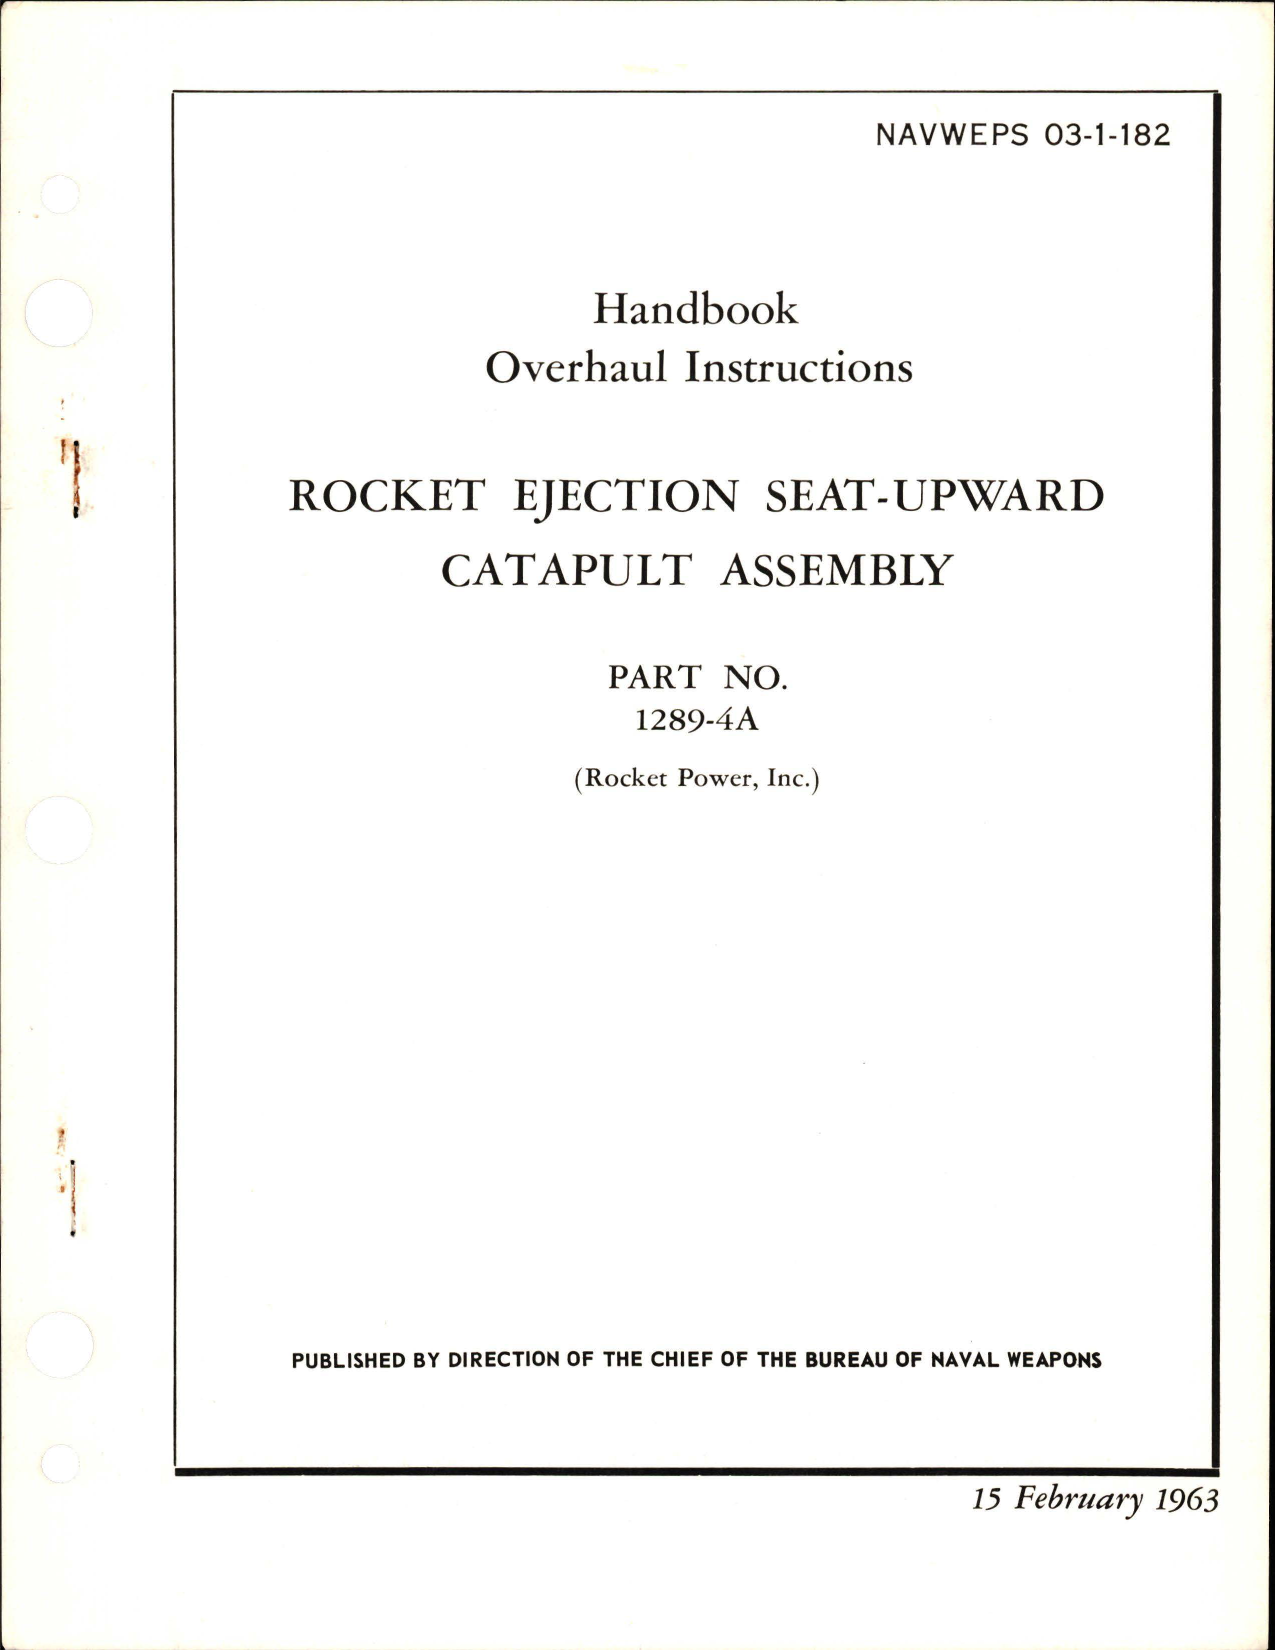 Sample page 1 from AirCorps Library document: Overhaul Instructions for Rocket Ejection Seat-Upward Catapult Assembly - Part 1289-4A 